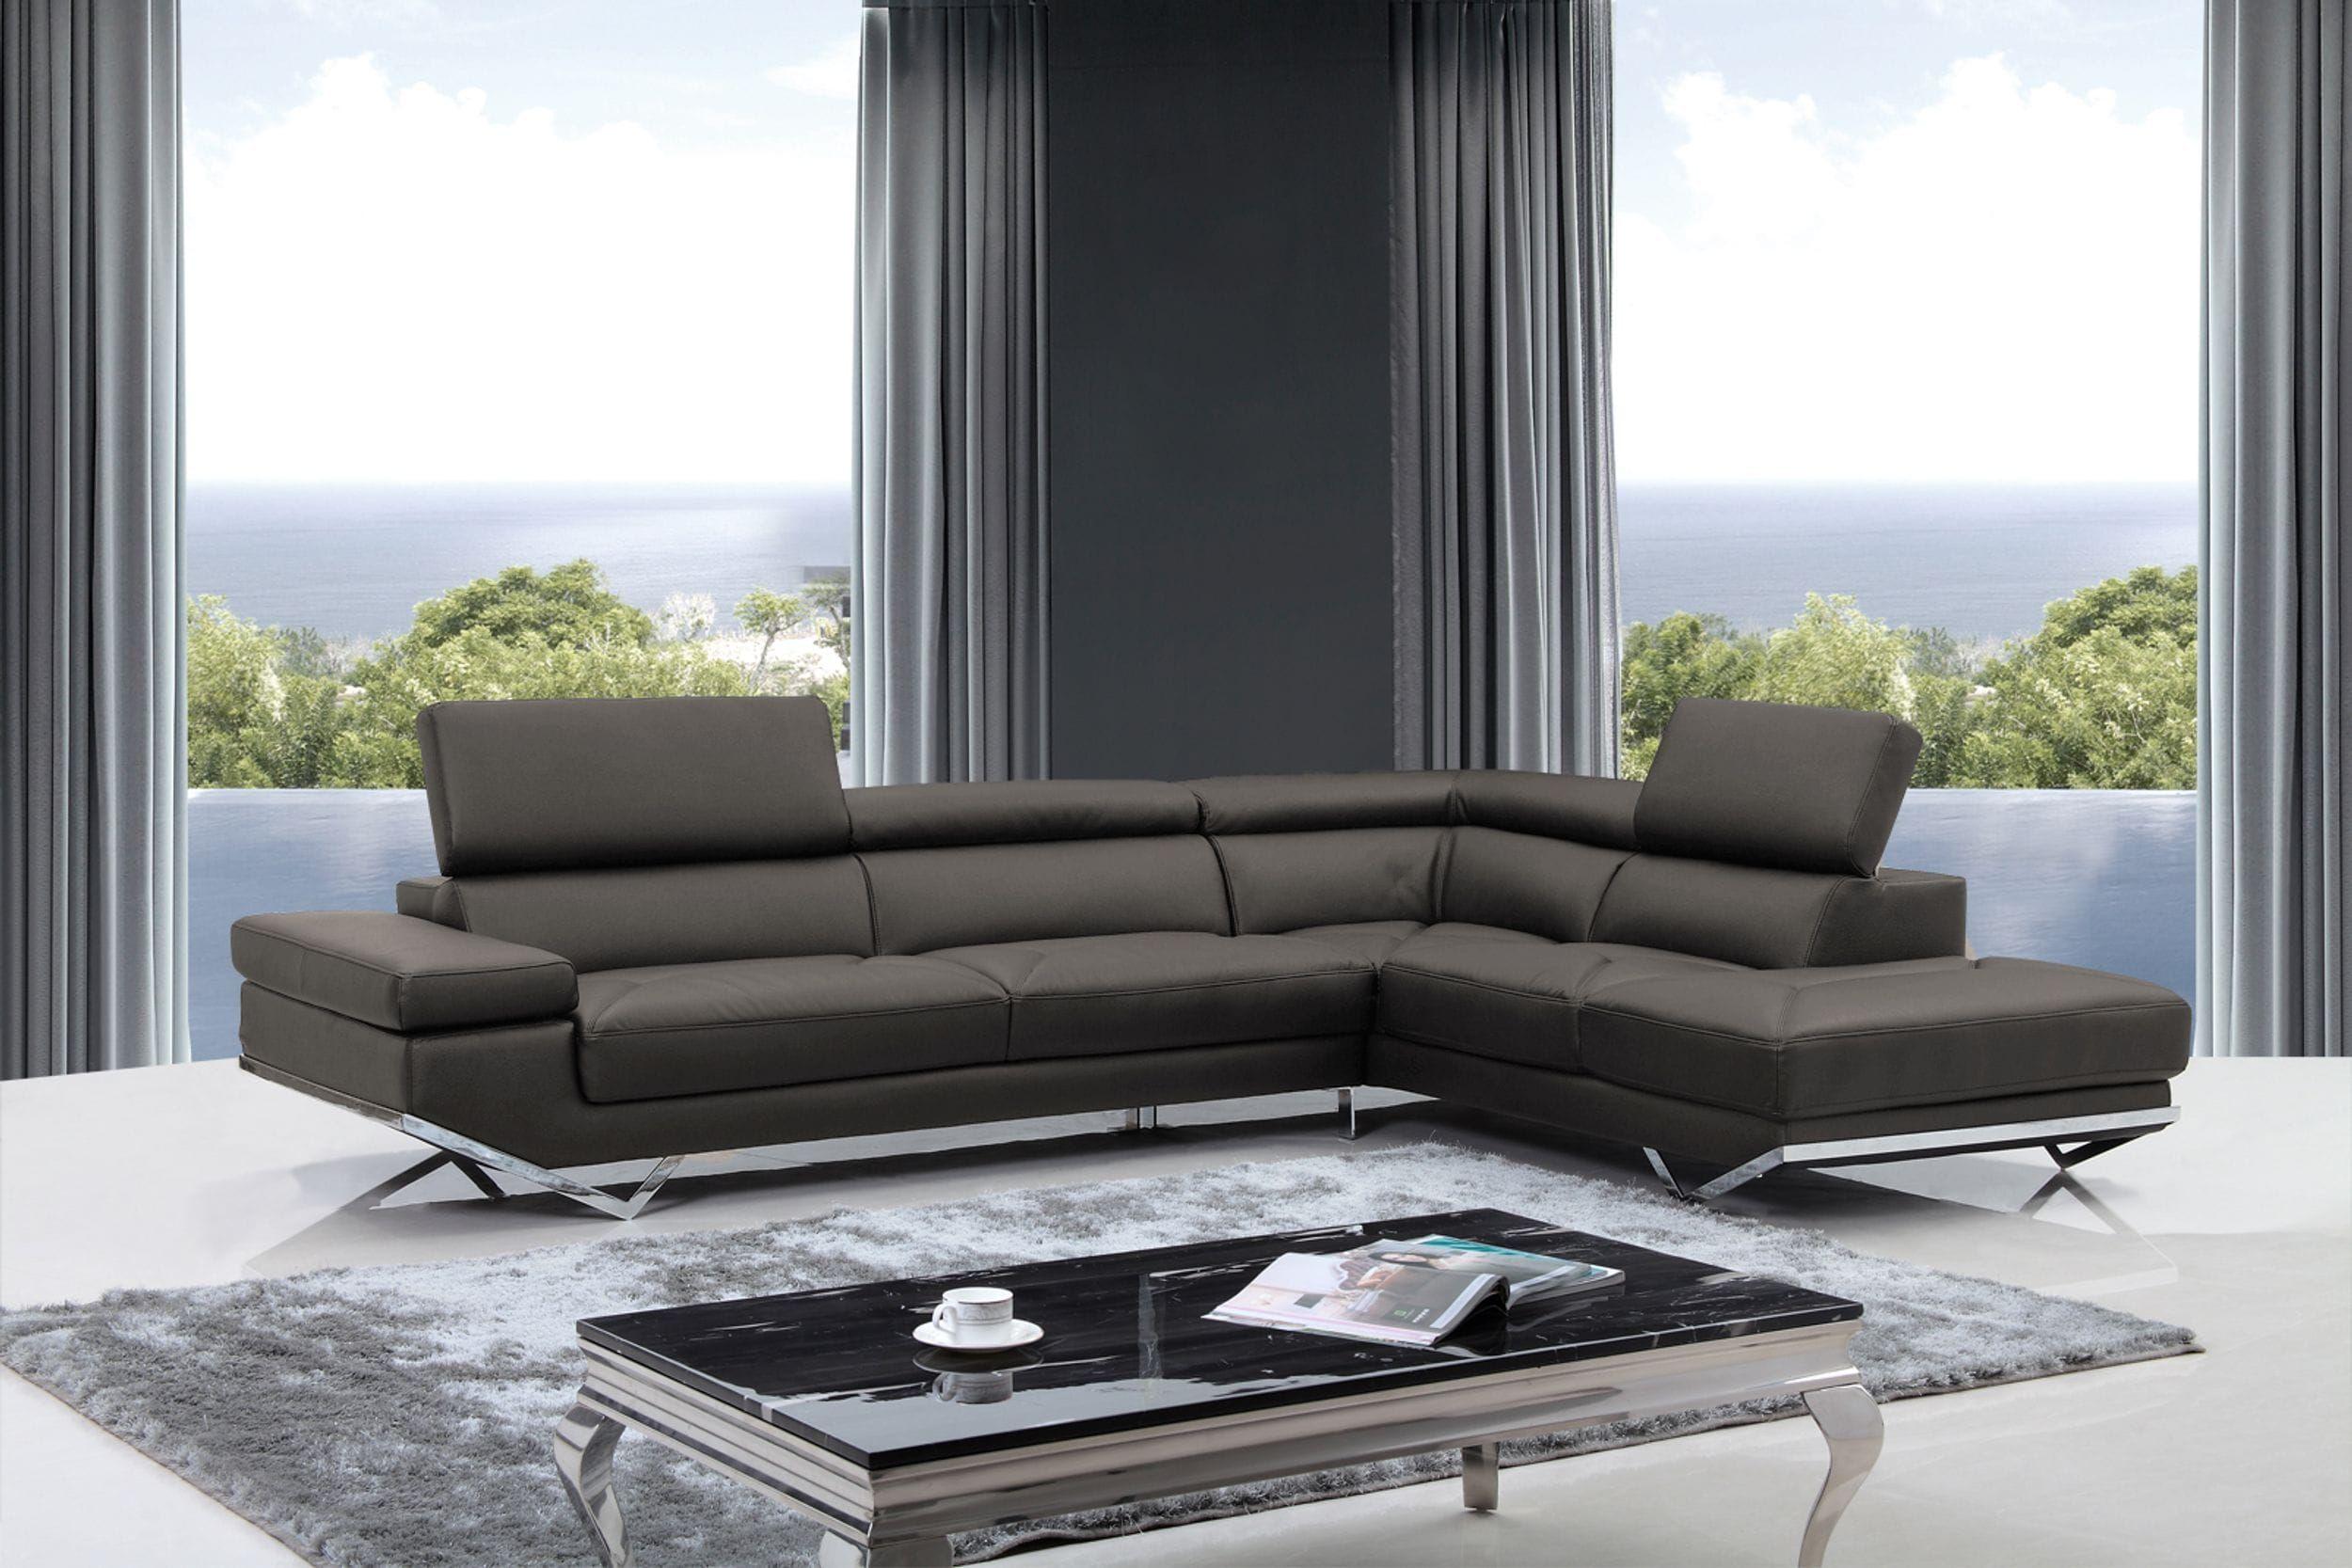 Modern Sectional Sofa Quebec VGKNK8488-SECT-DKGRY-Z in Dark Gray Eco Leather